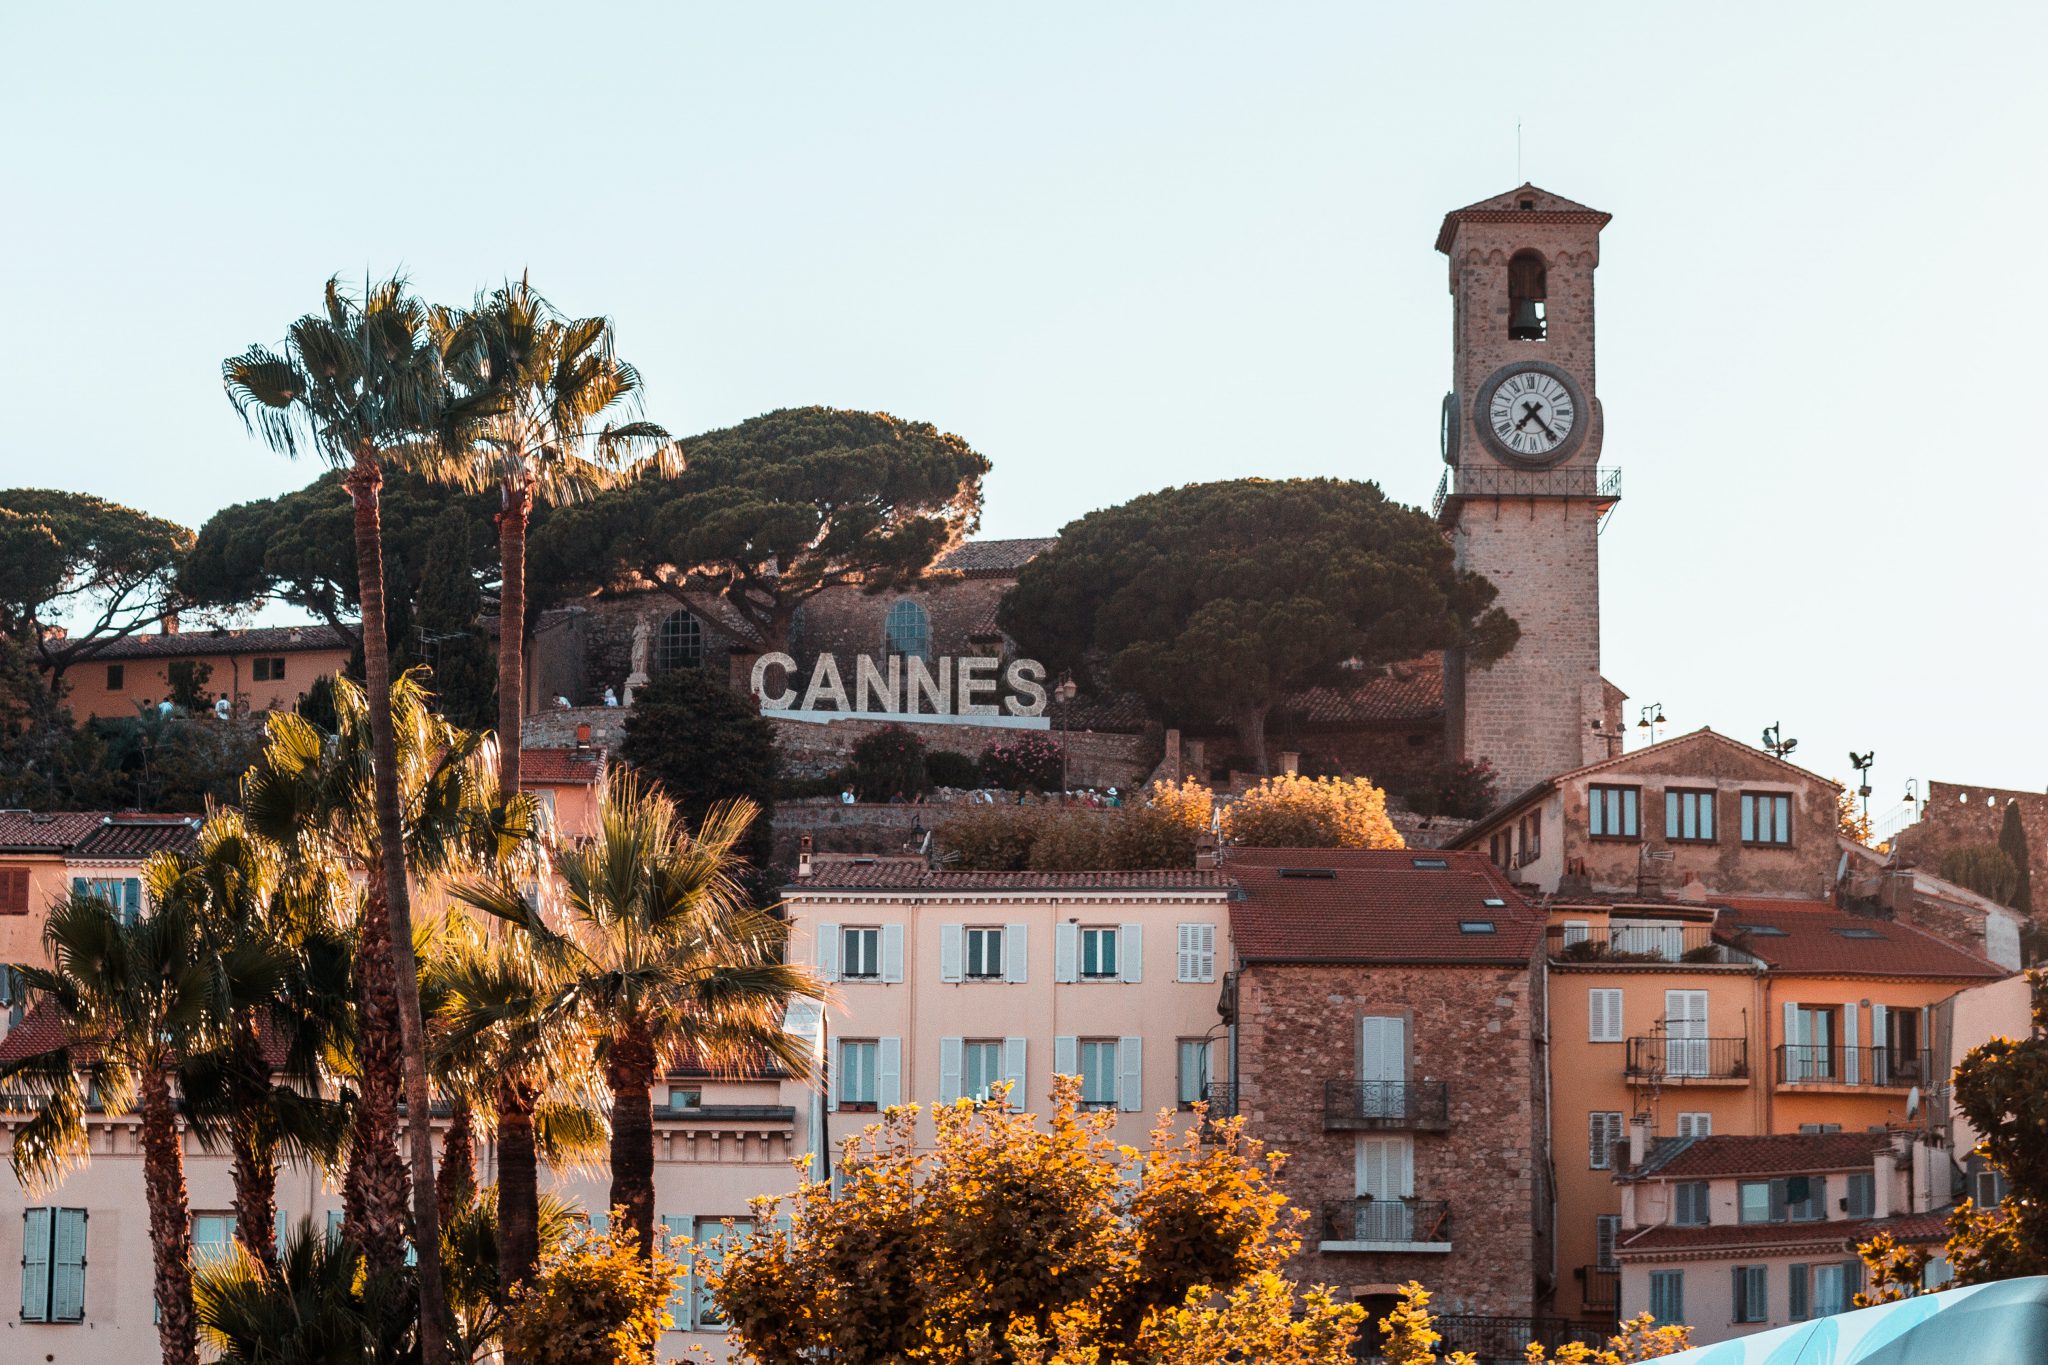 Cannes buildings and houses